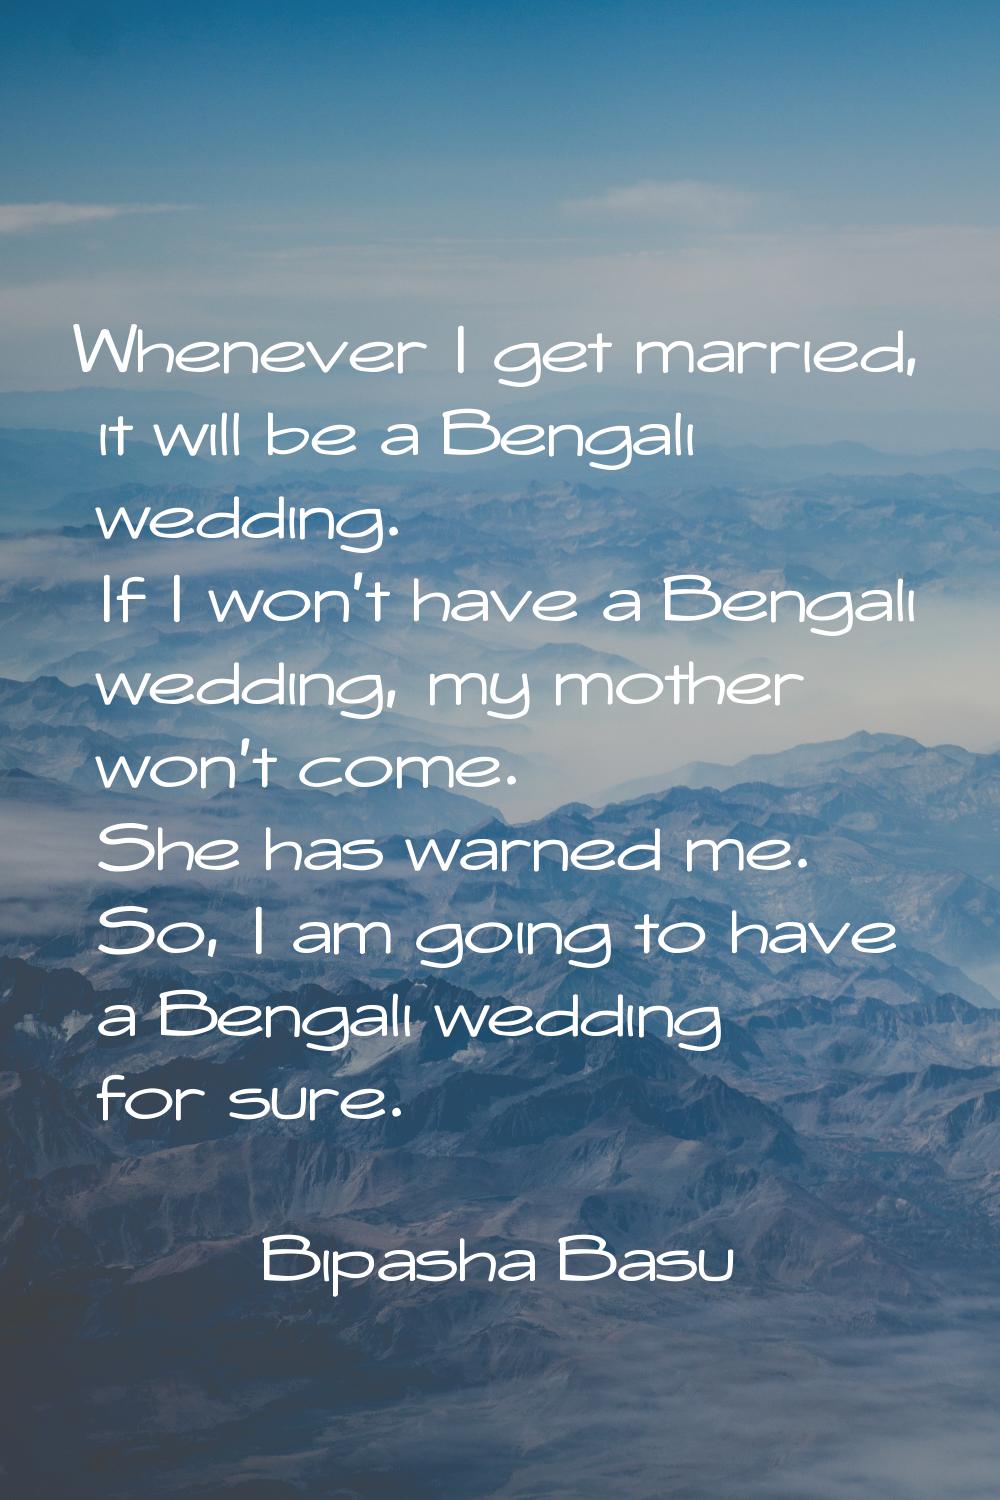 Whenever I get married, it will be a Bengali wedding. If I won't have a Bengali wedding, my mother 